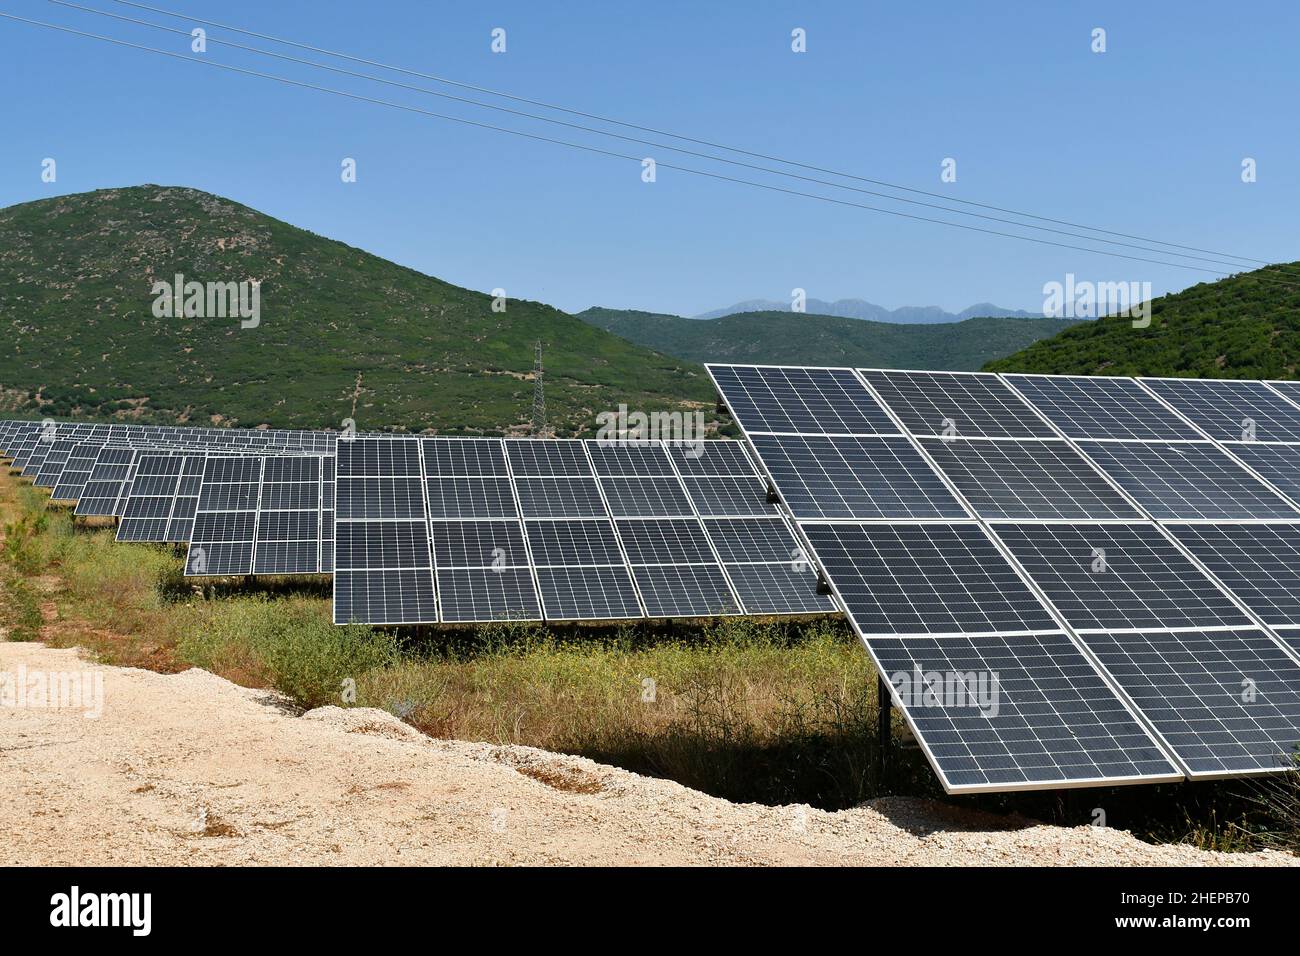 Greece, photovoltaic panels for electricity generation Stock Photo